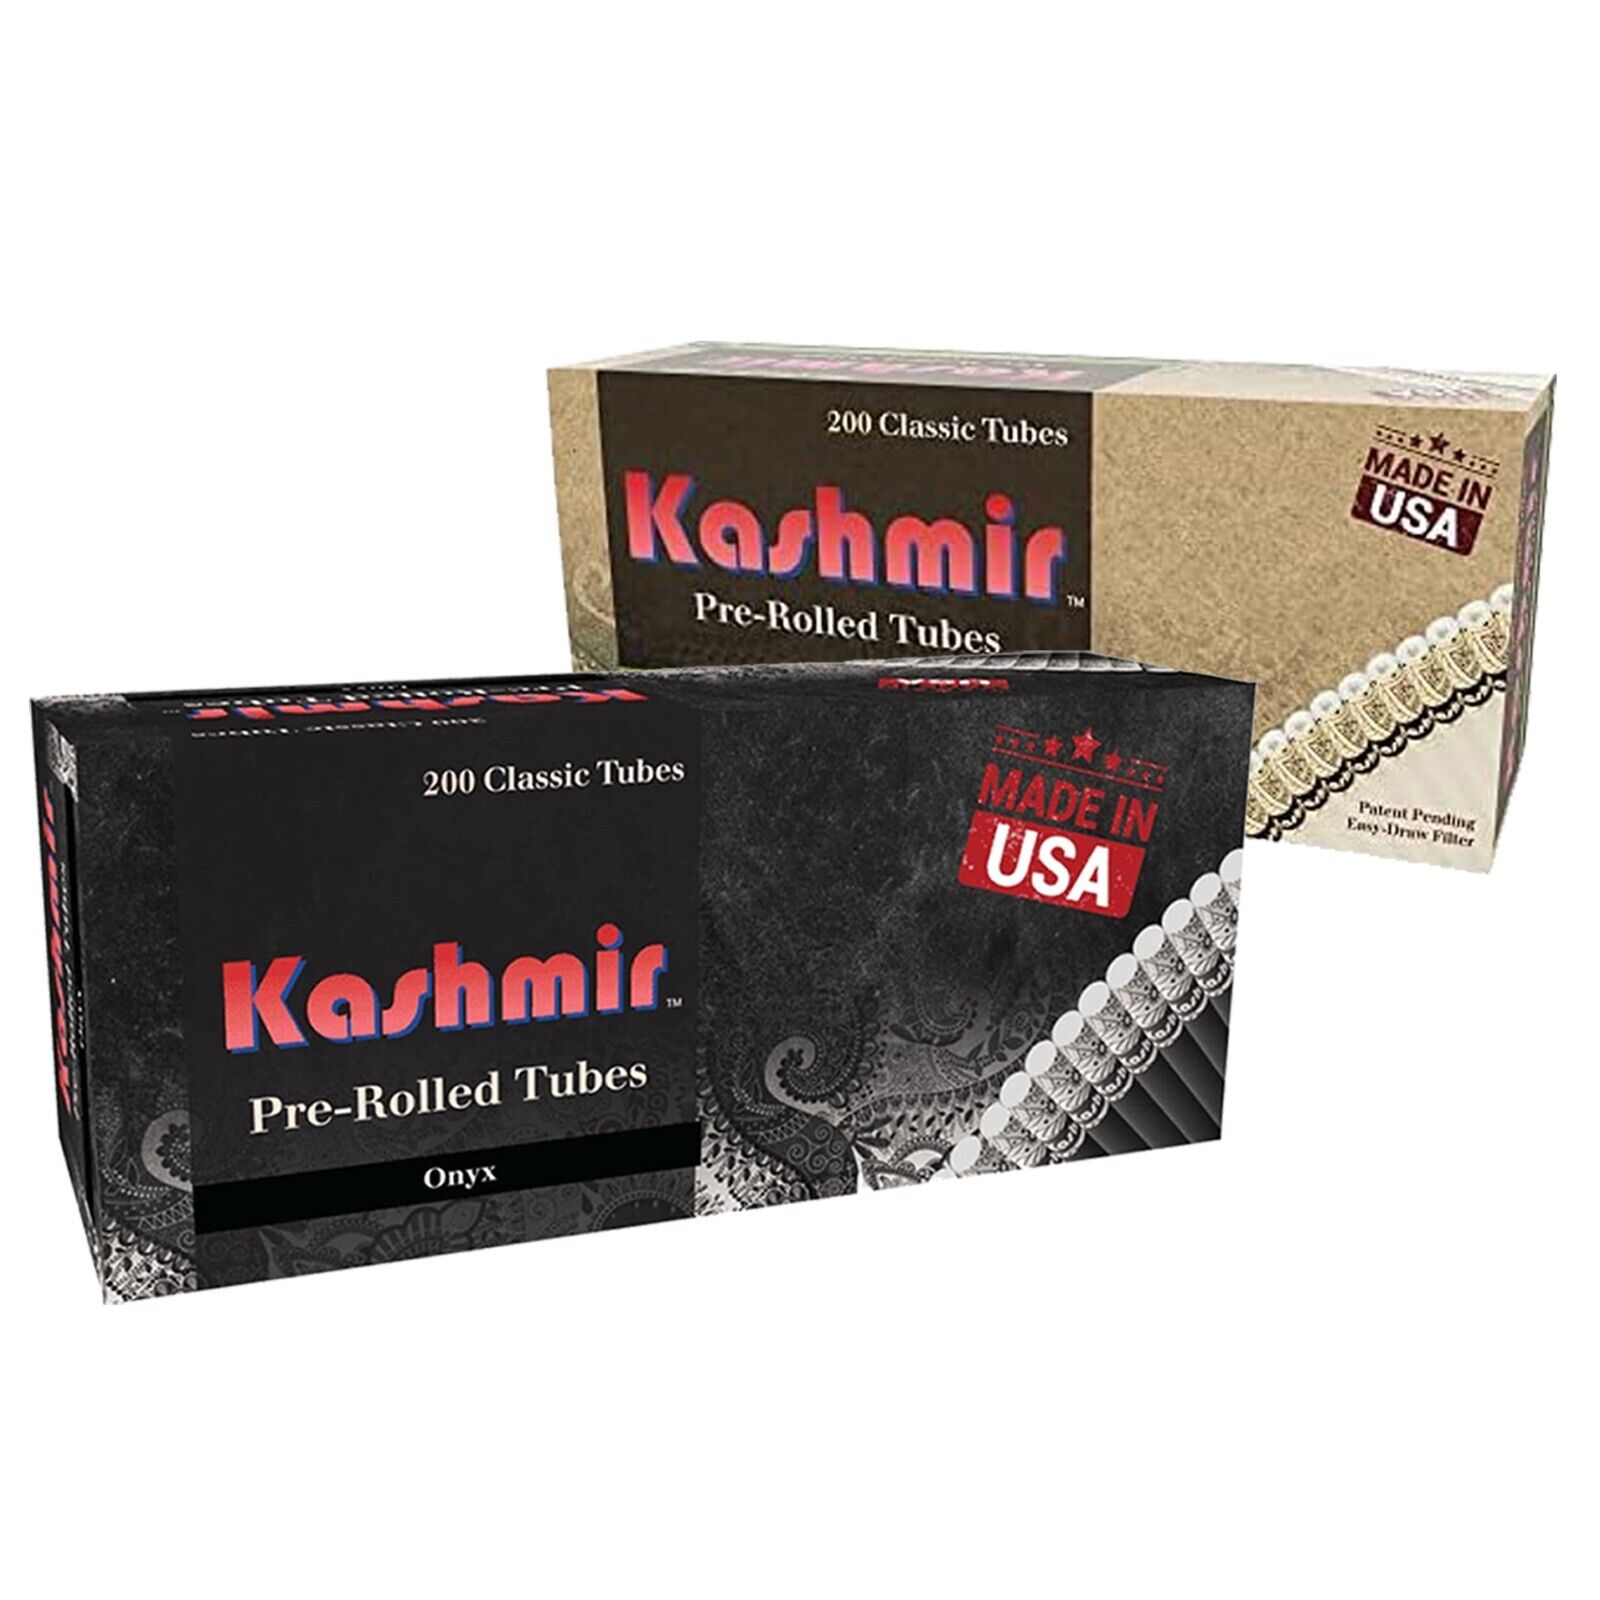 Cigarette Tubes Bundle Pack of 400 Organic & Onyx Pre-Rolled Tubes by Kashmir